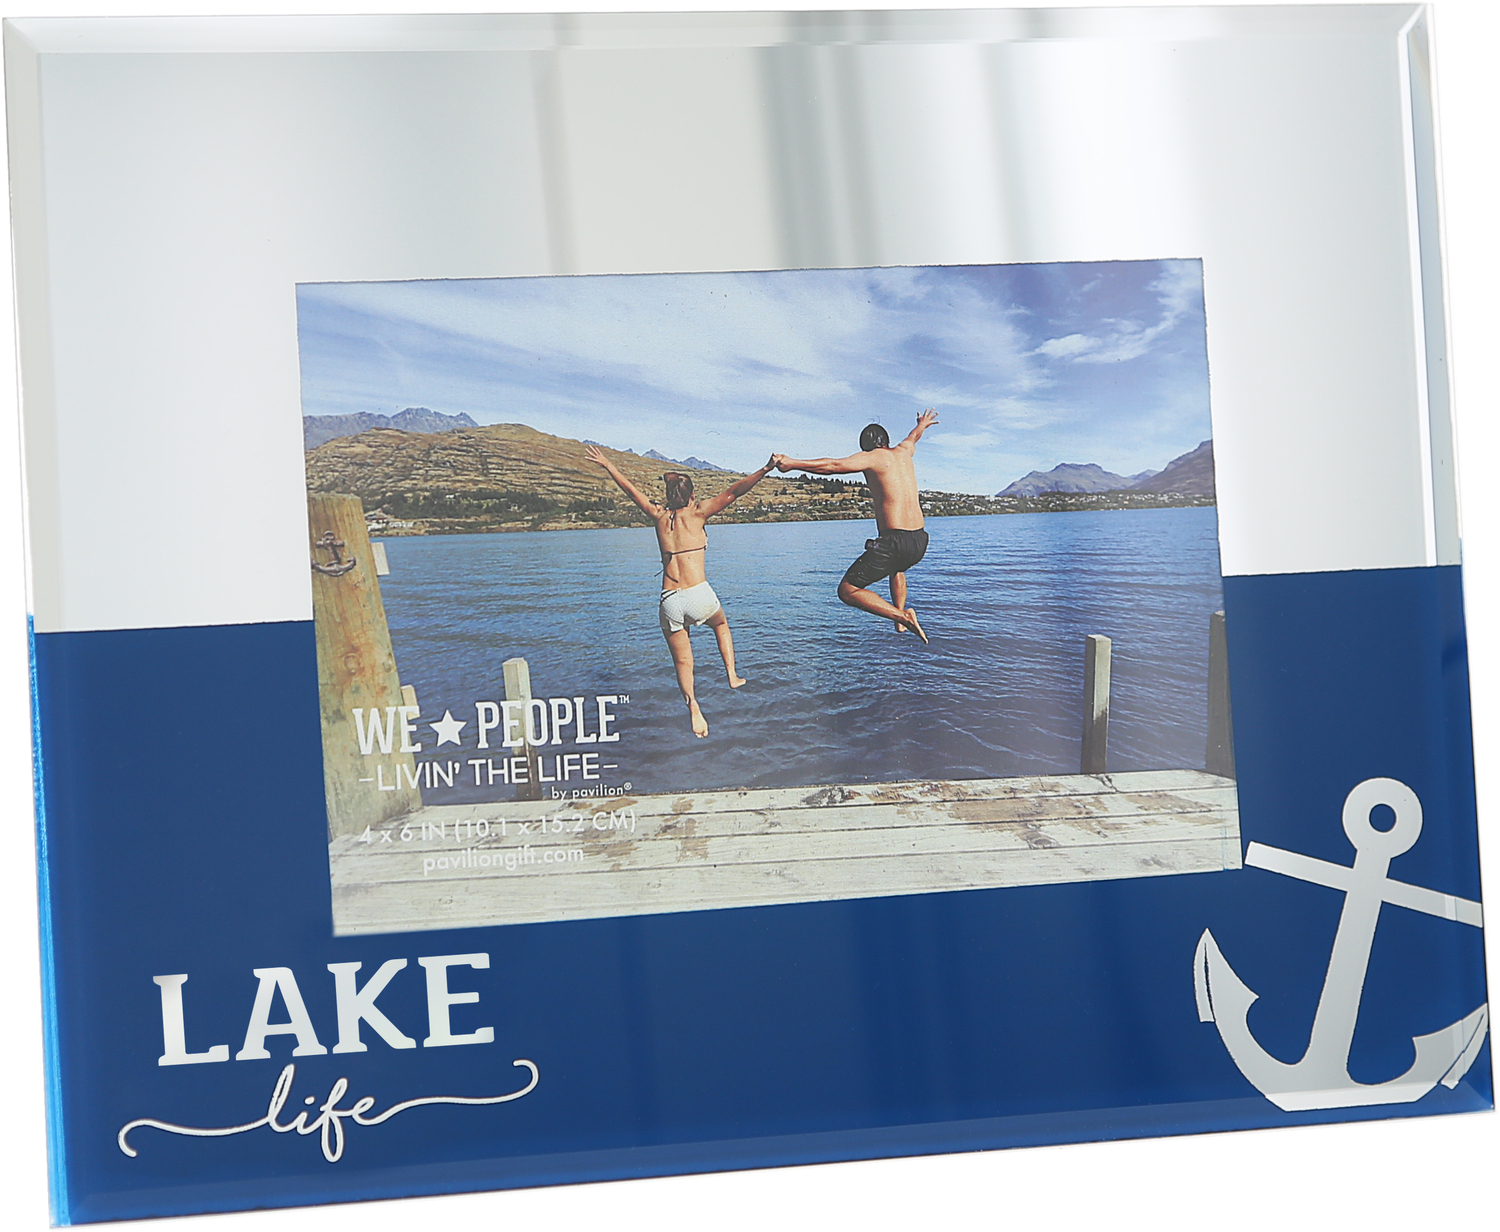 Lake Life by We People - Lake Life - 9" x 7" Mirrored Glass Frame
(Holds 6" x 4")